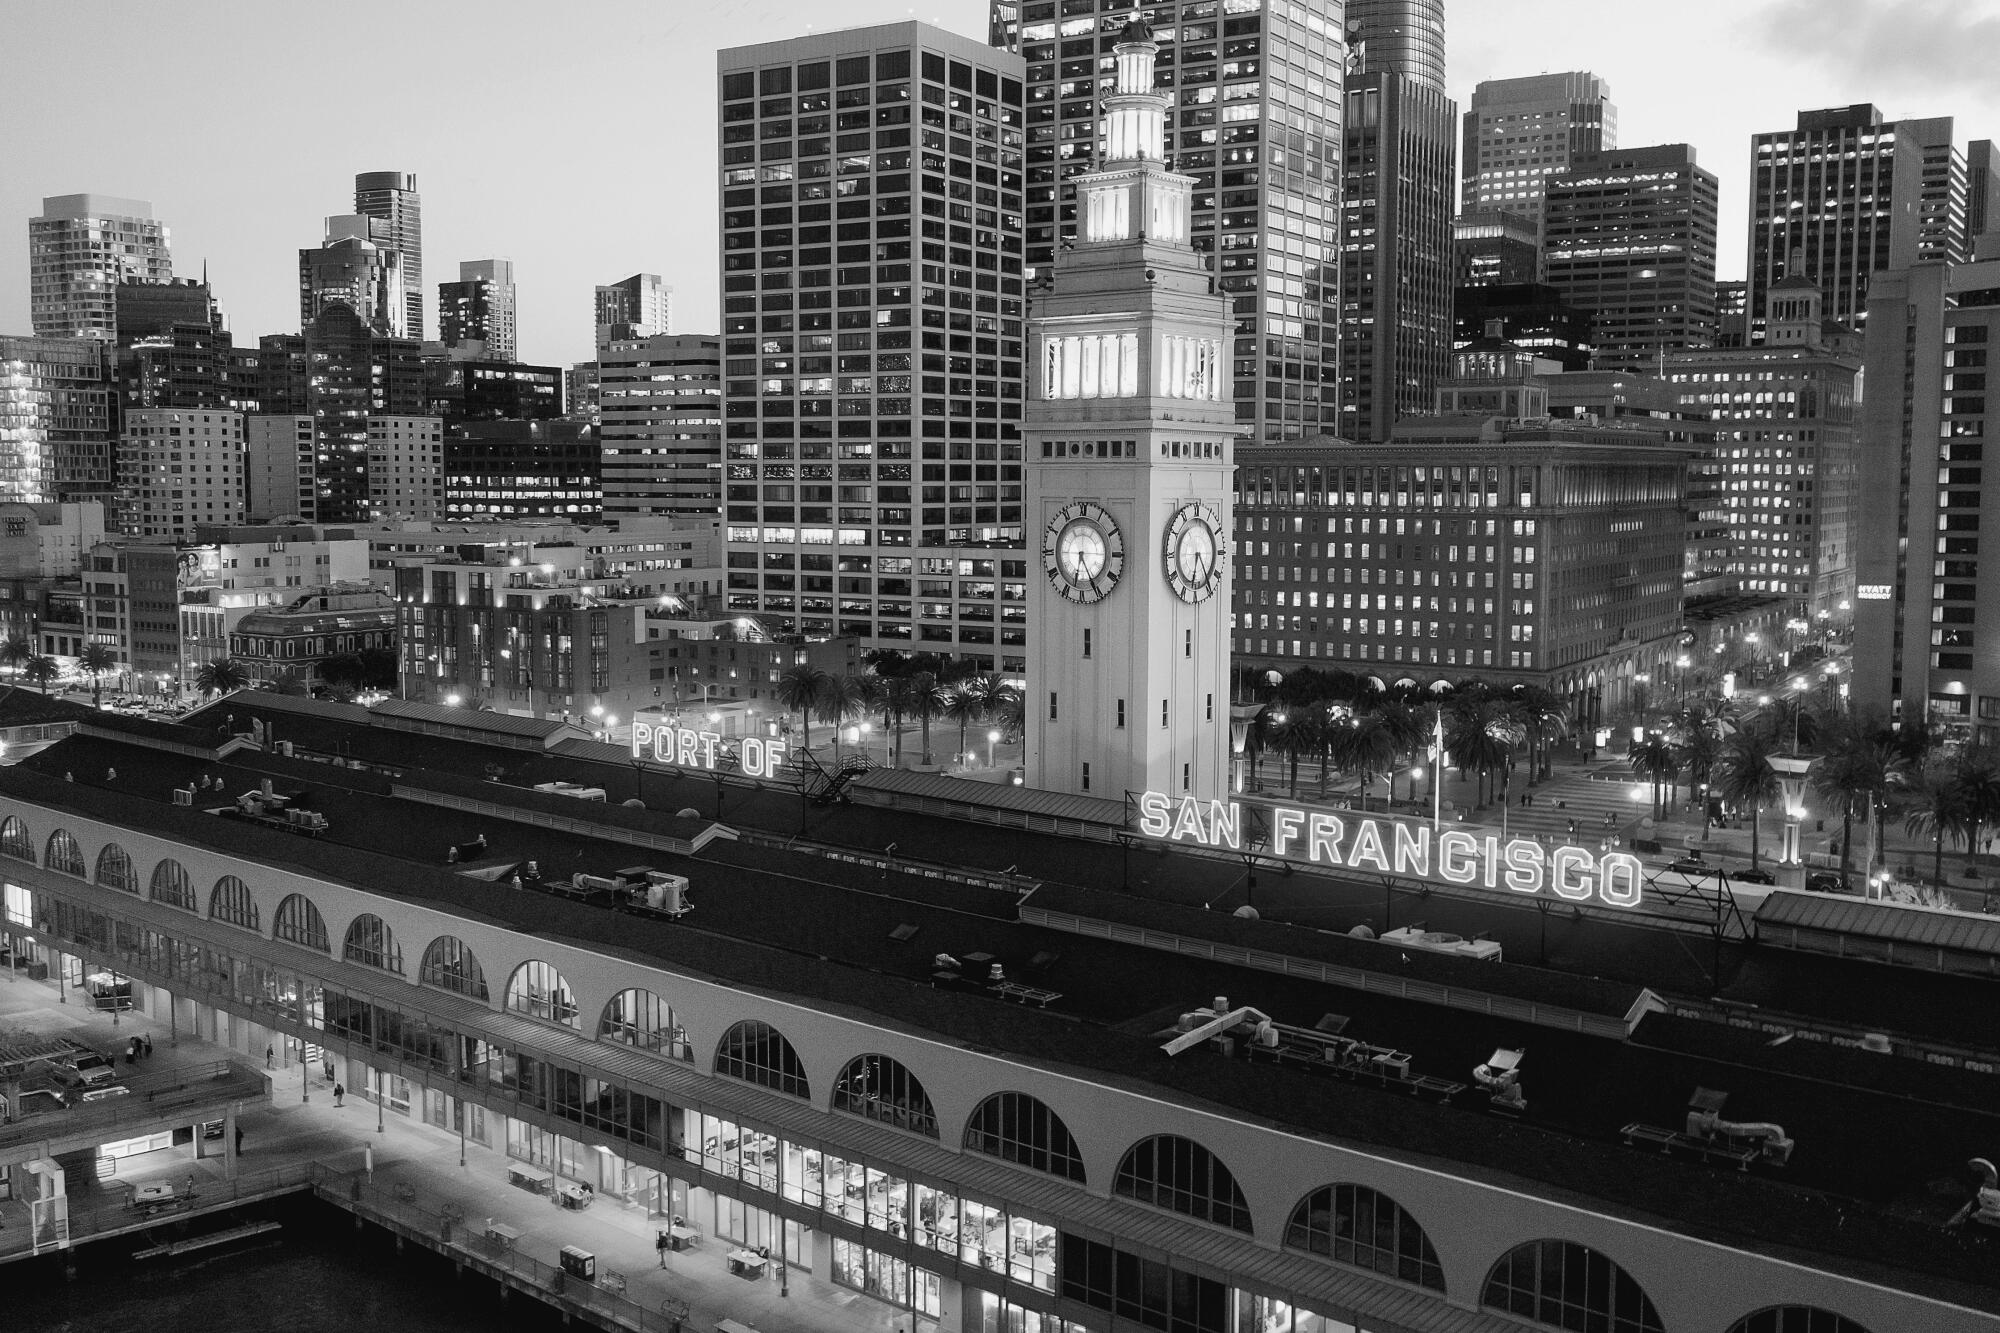 San Francisco's Ferry Building in a black-and-white photo